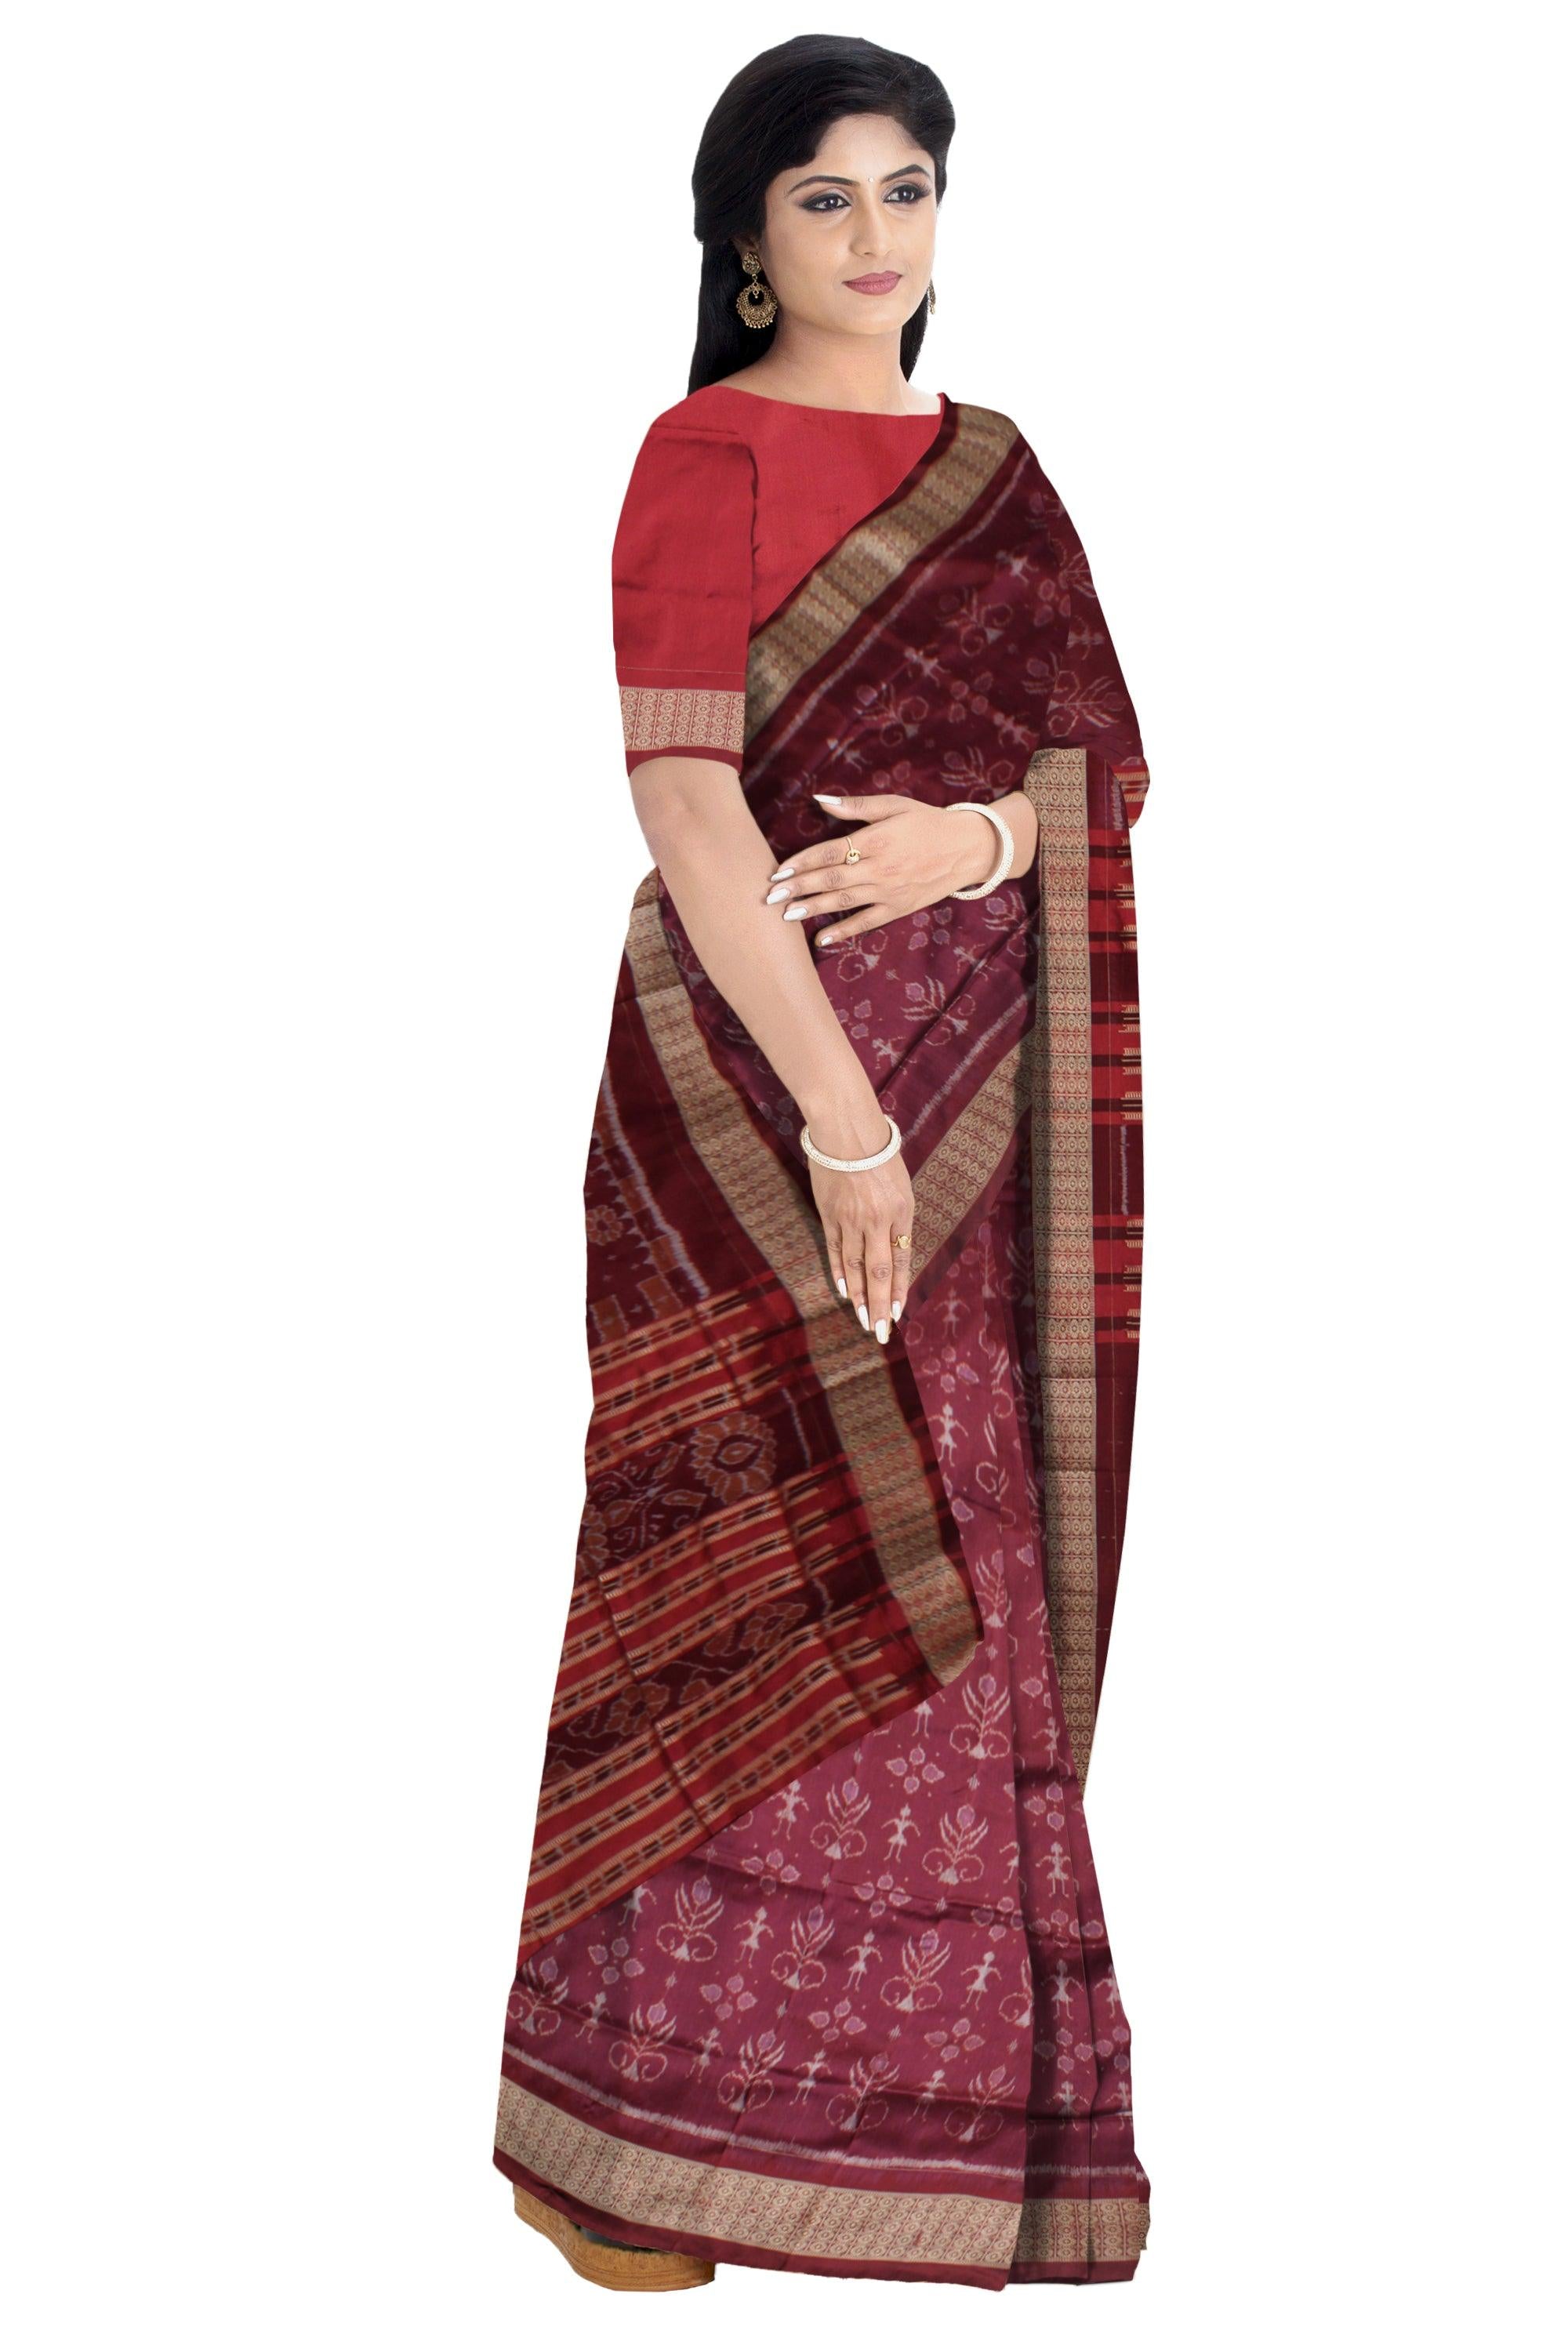 TERRACOTTA WITH TREE PATTERN PATA SAREE IS CHOCOLATE MAROON COLOR BASE, WITH MATCHING BLOUSE PIECE. - Koshali Arts & Crafts Enterprise